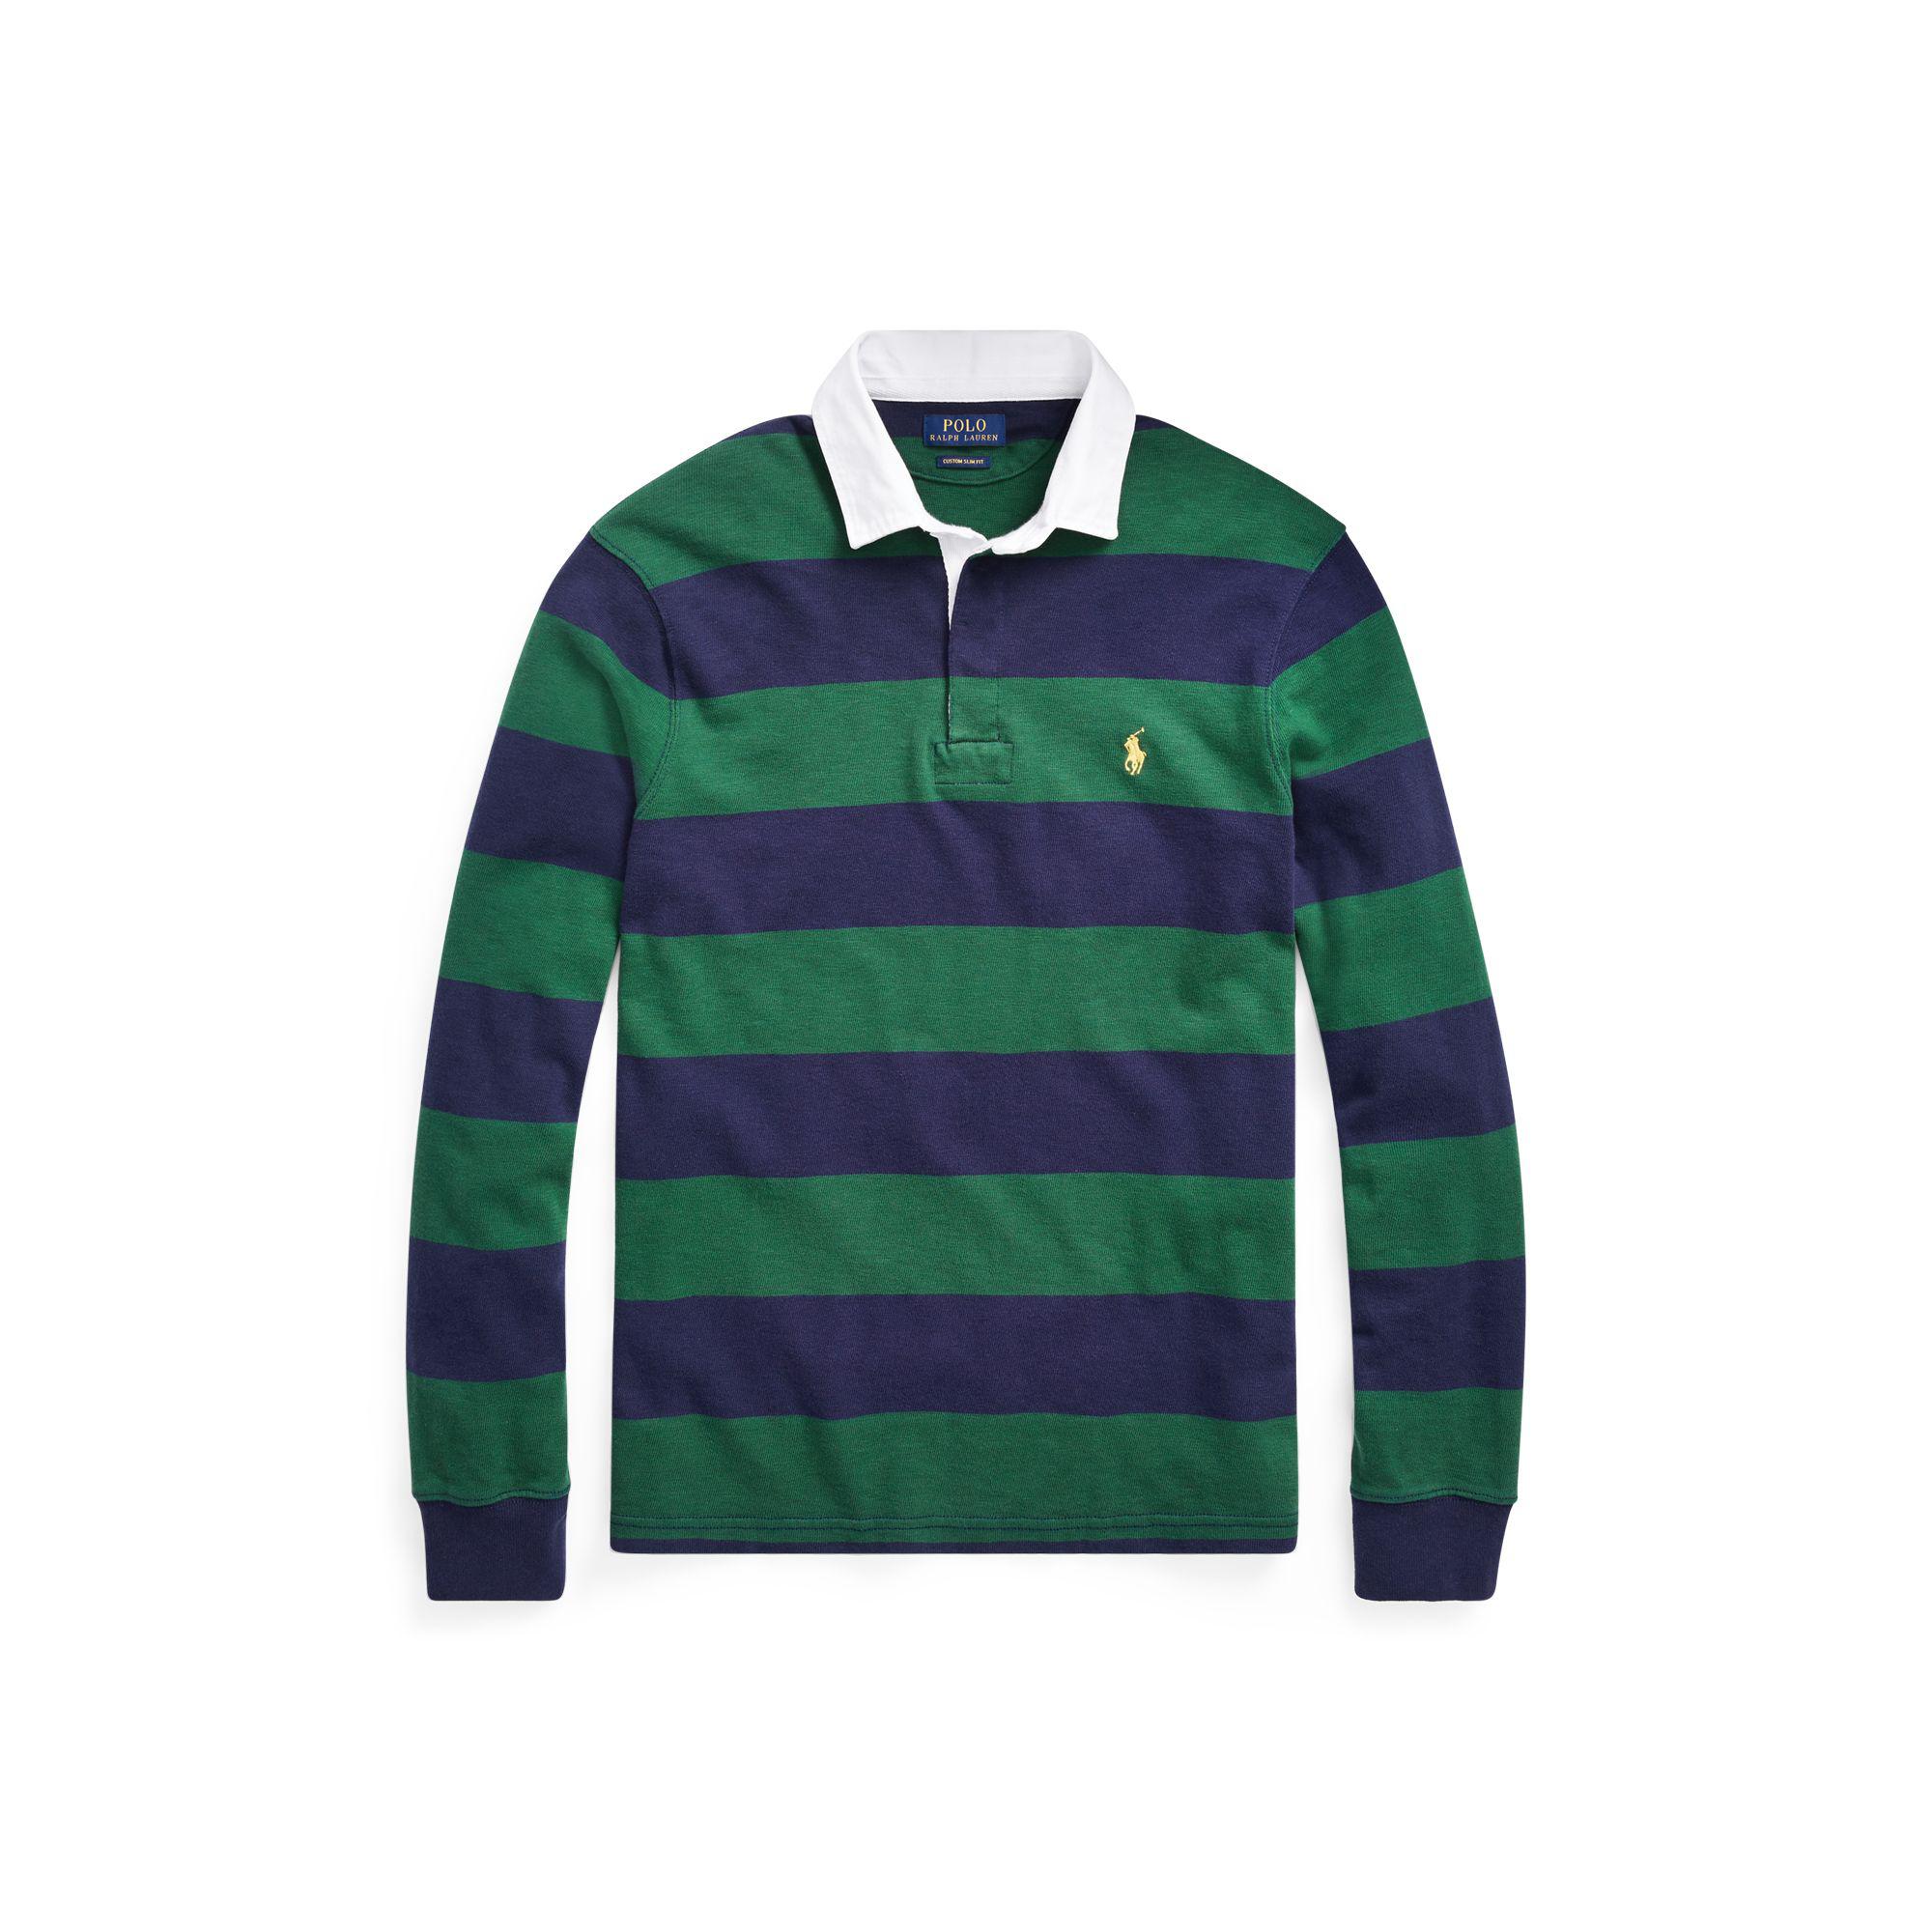 Polo ralph lauren mens iconic rugby custom fit shirt Gainesville ...